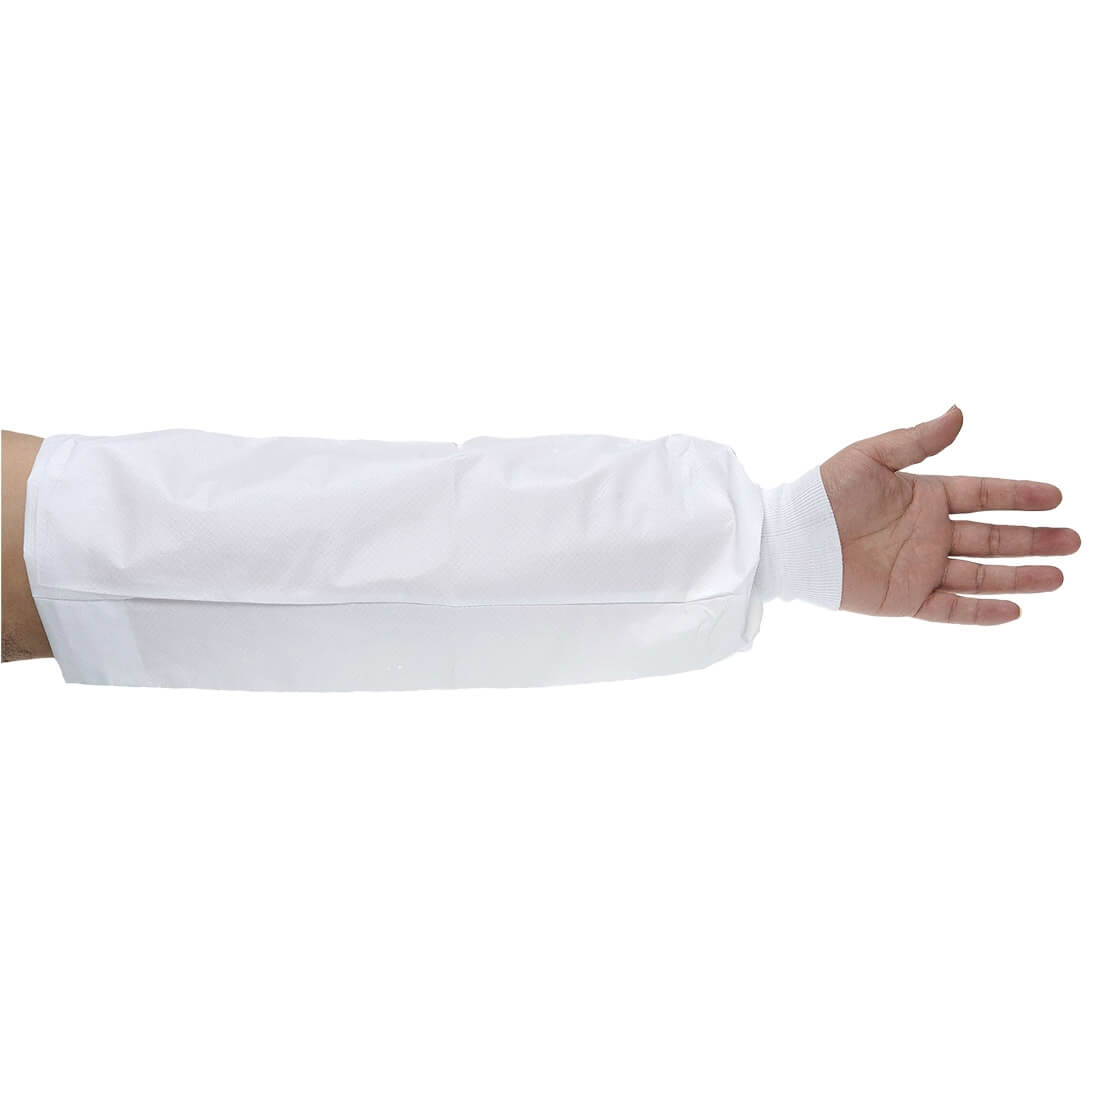 BizTex® Microporous Sleeve with knitted cuff Type 6PB - Personal protection